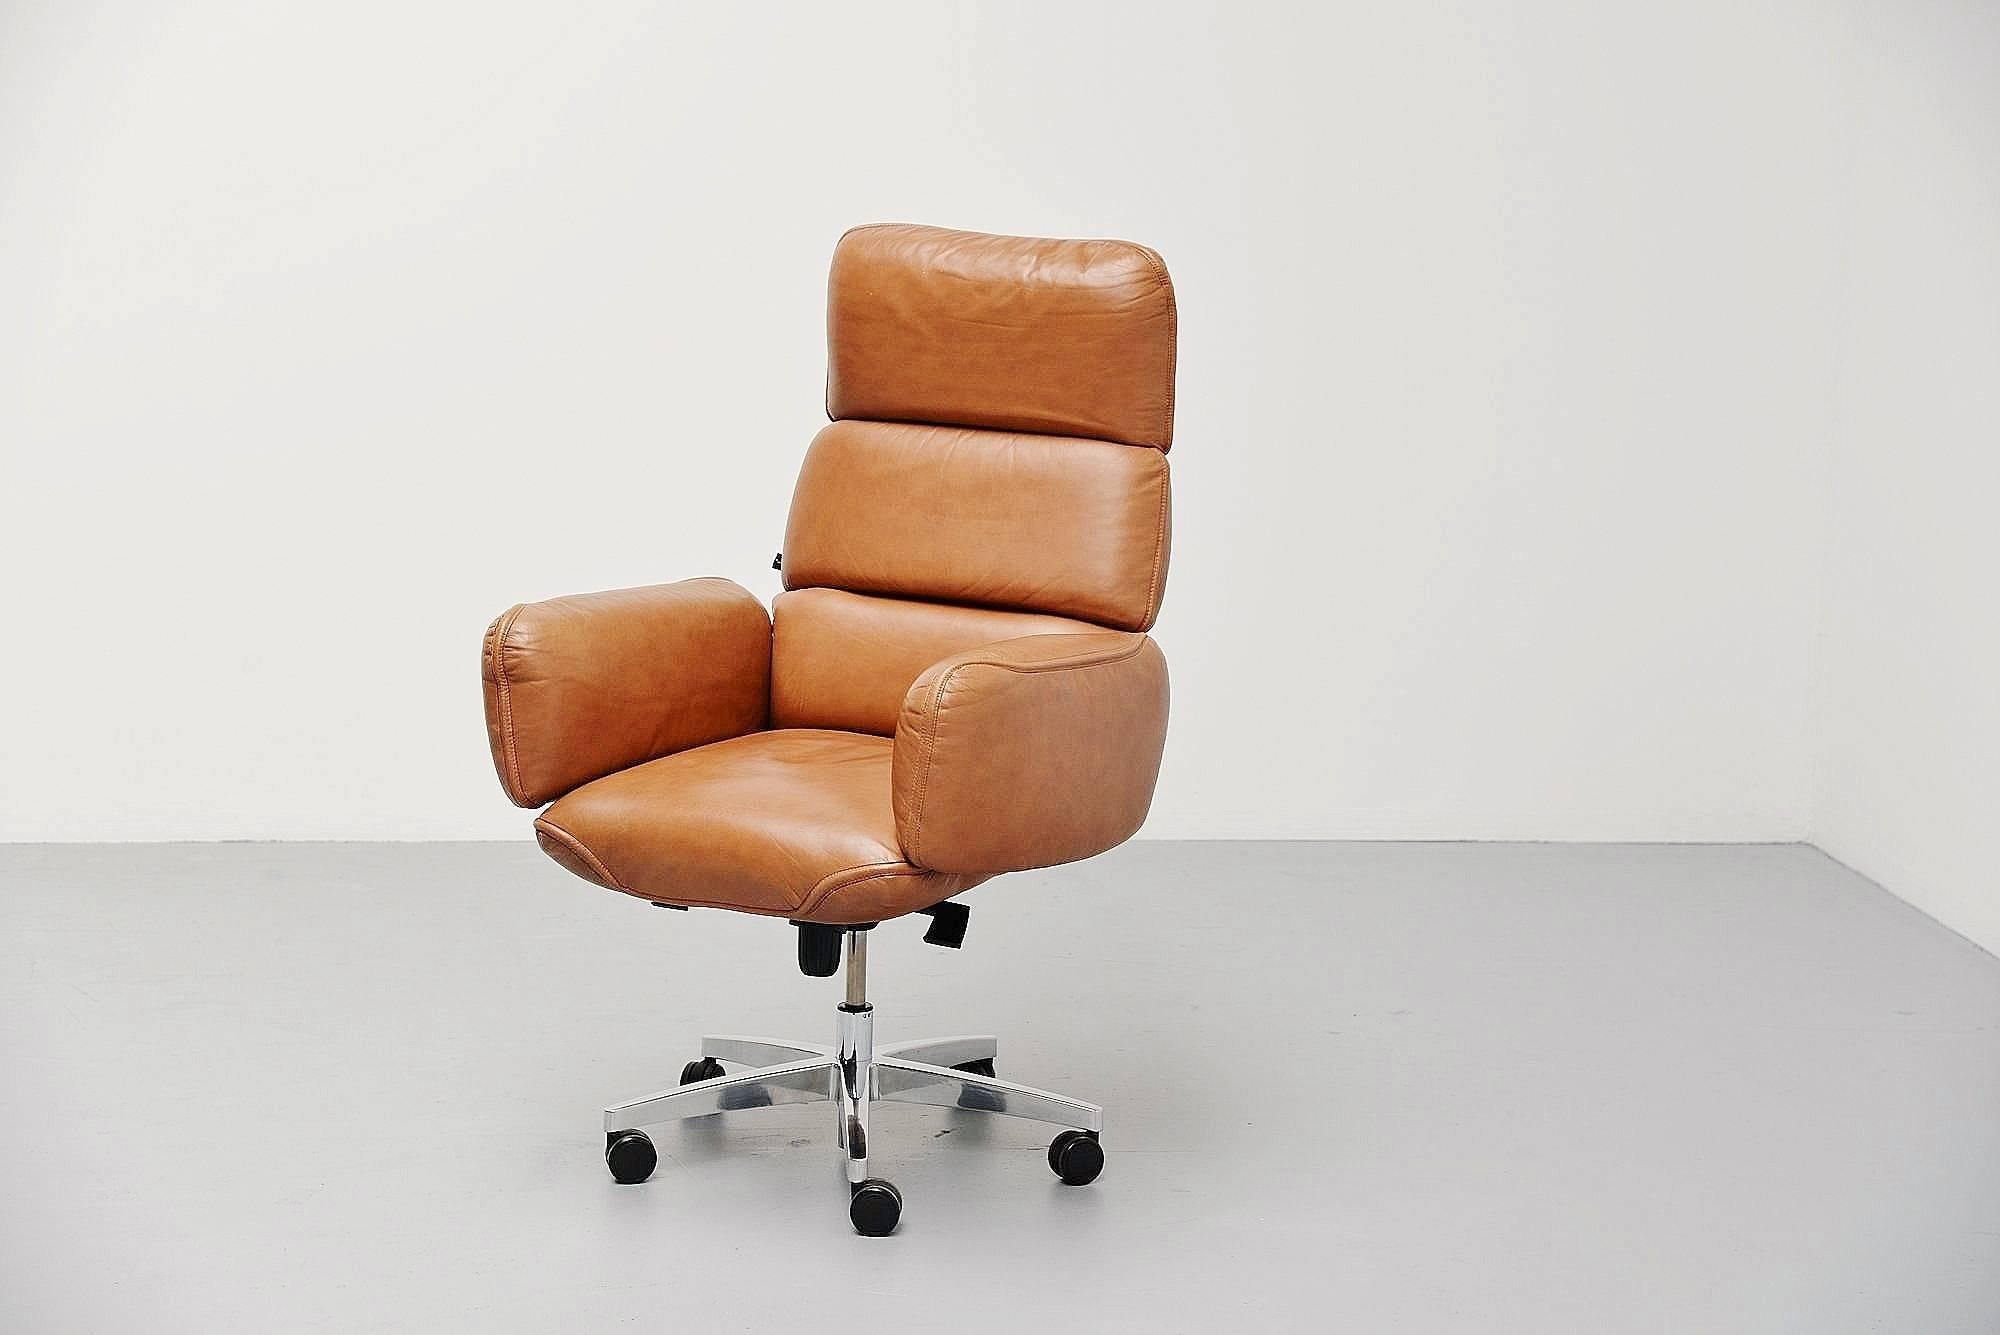 Highly comfortable and adjustable executive desk chair designed by Otto Zapf, manufactured by Knoll International United States, 1975. This chair has a five star base with twin wheels. Its adjustable in height, it tilts and seats highly comfortable.